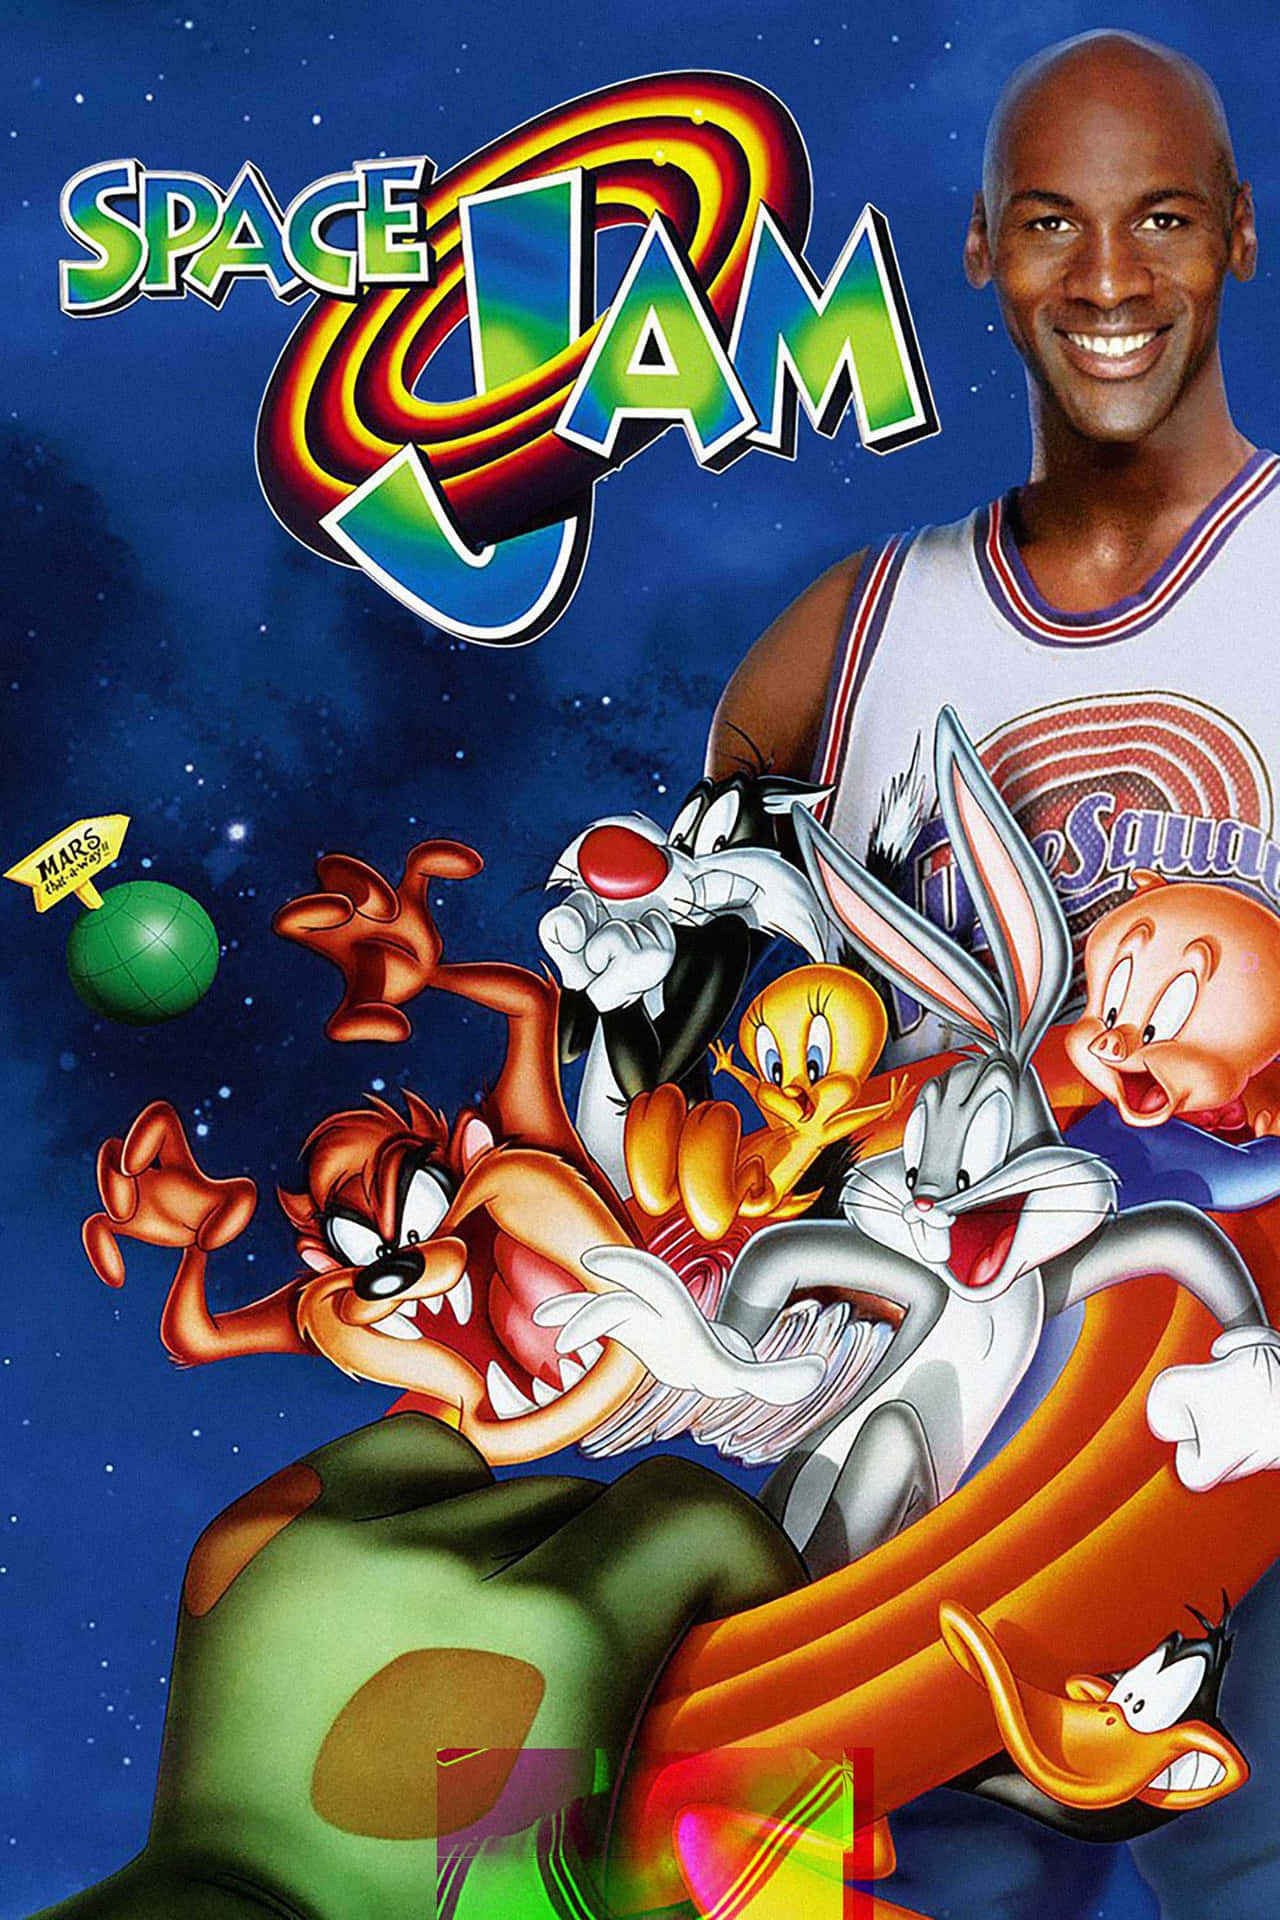 100+] Cool Space Jam Wallpapers